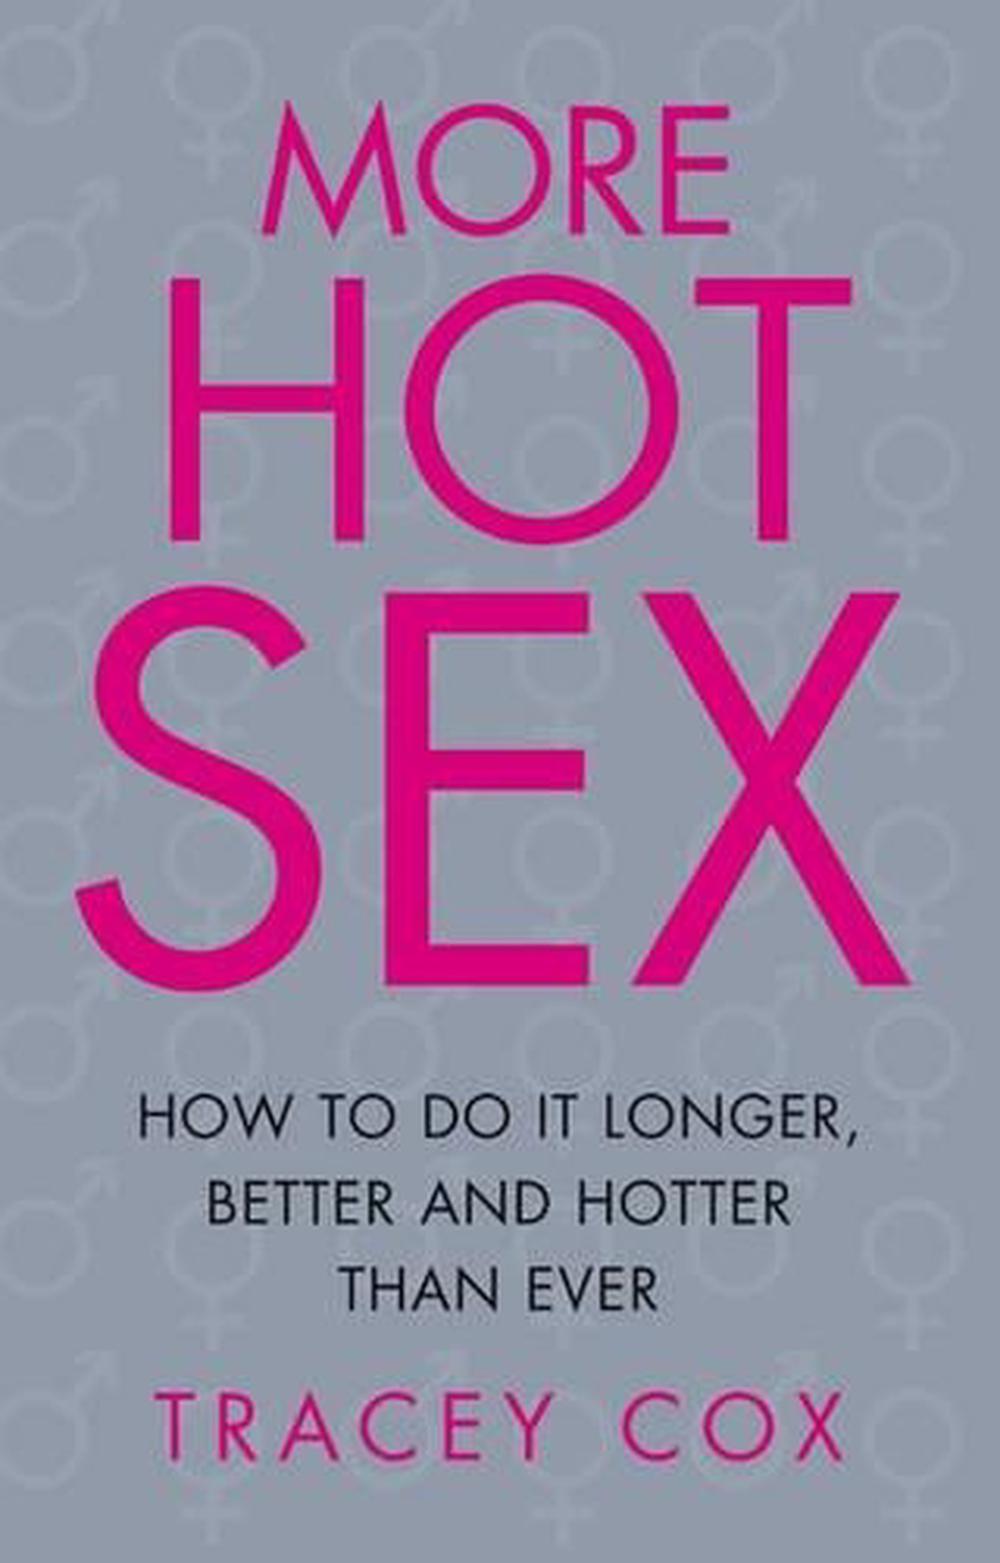 More Hot Sex By Tracey Cox Paperback 9781863255806 Buy Online At The Nile 5712